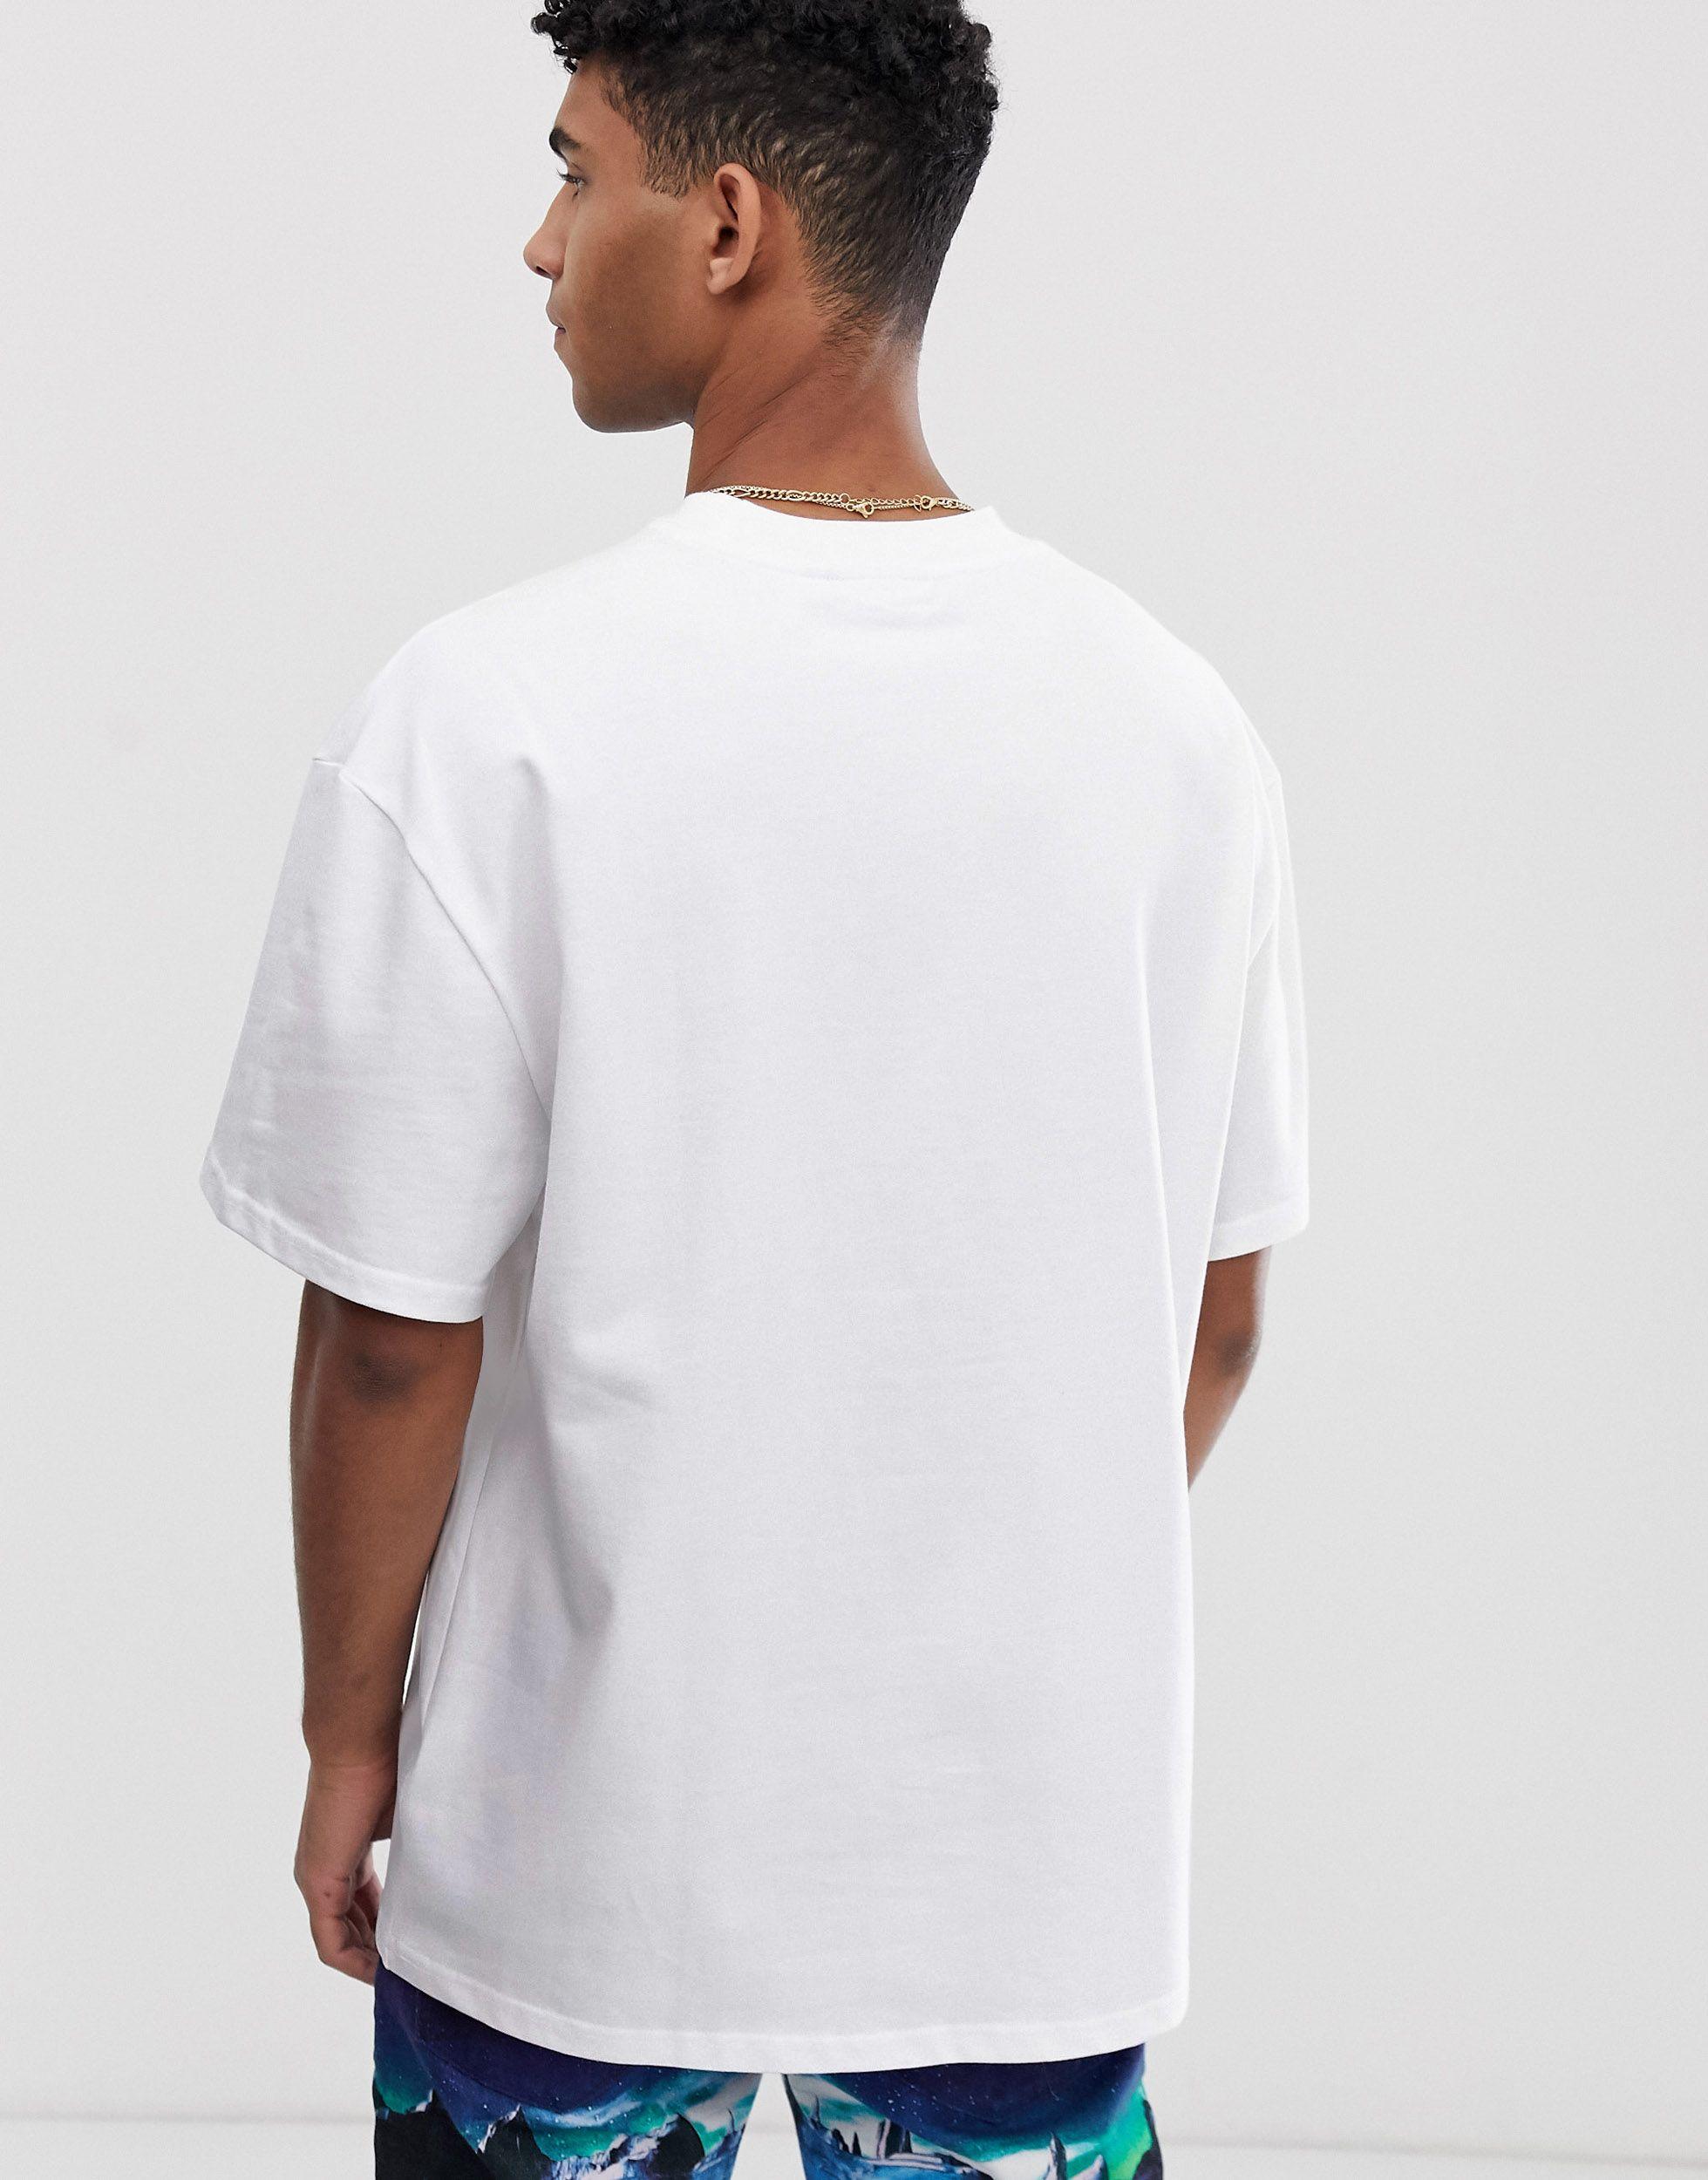 Buy > great t shirt weekday > in stock